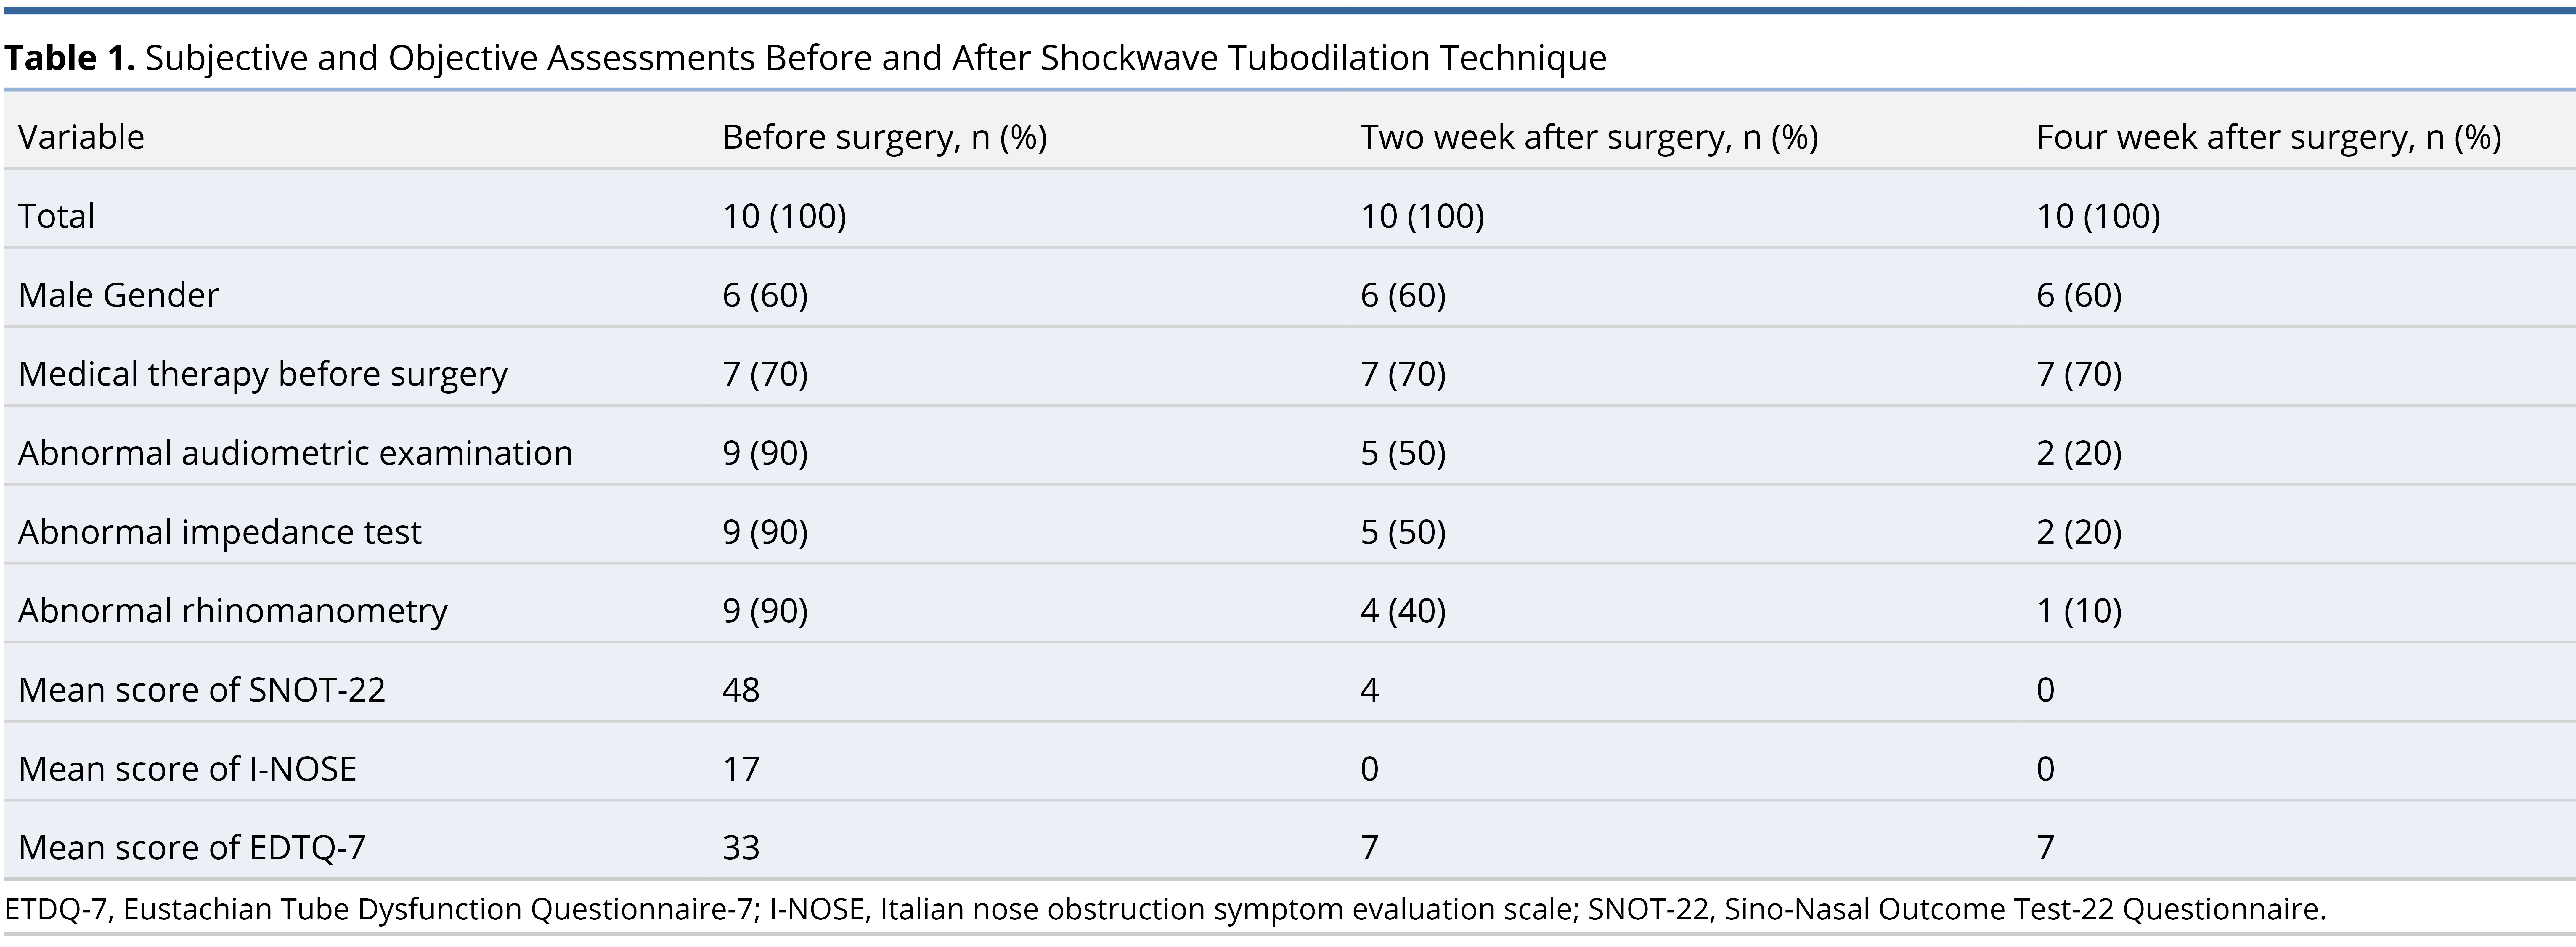 Table 1.jpgSubjective and Objective Assessments Before and After Shockwave Tubodilation Technique